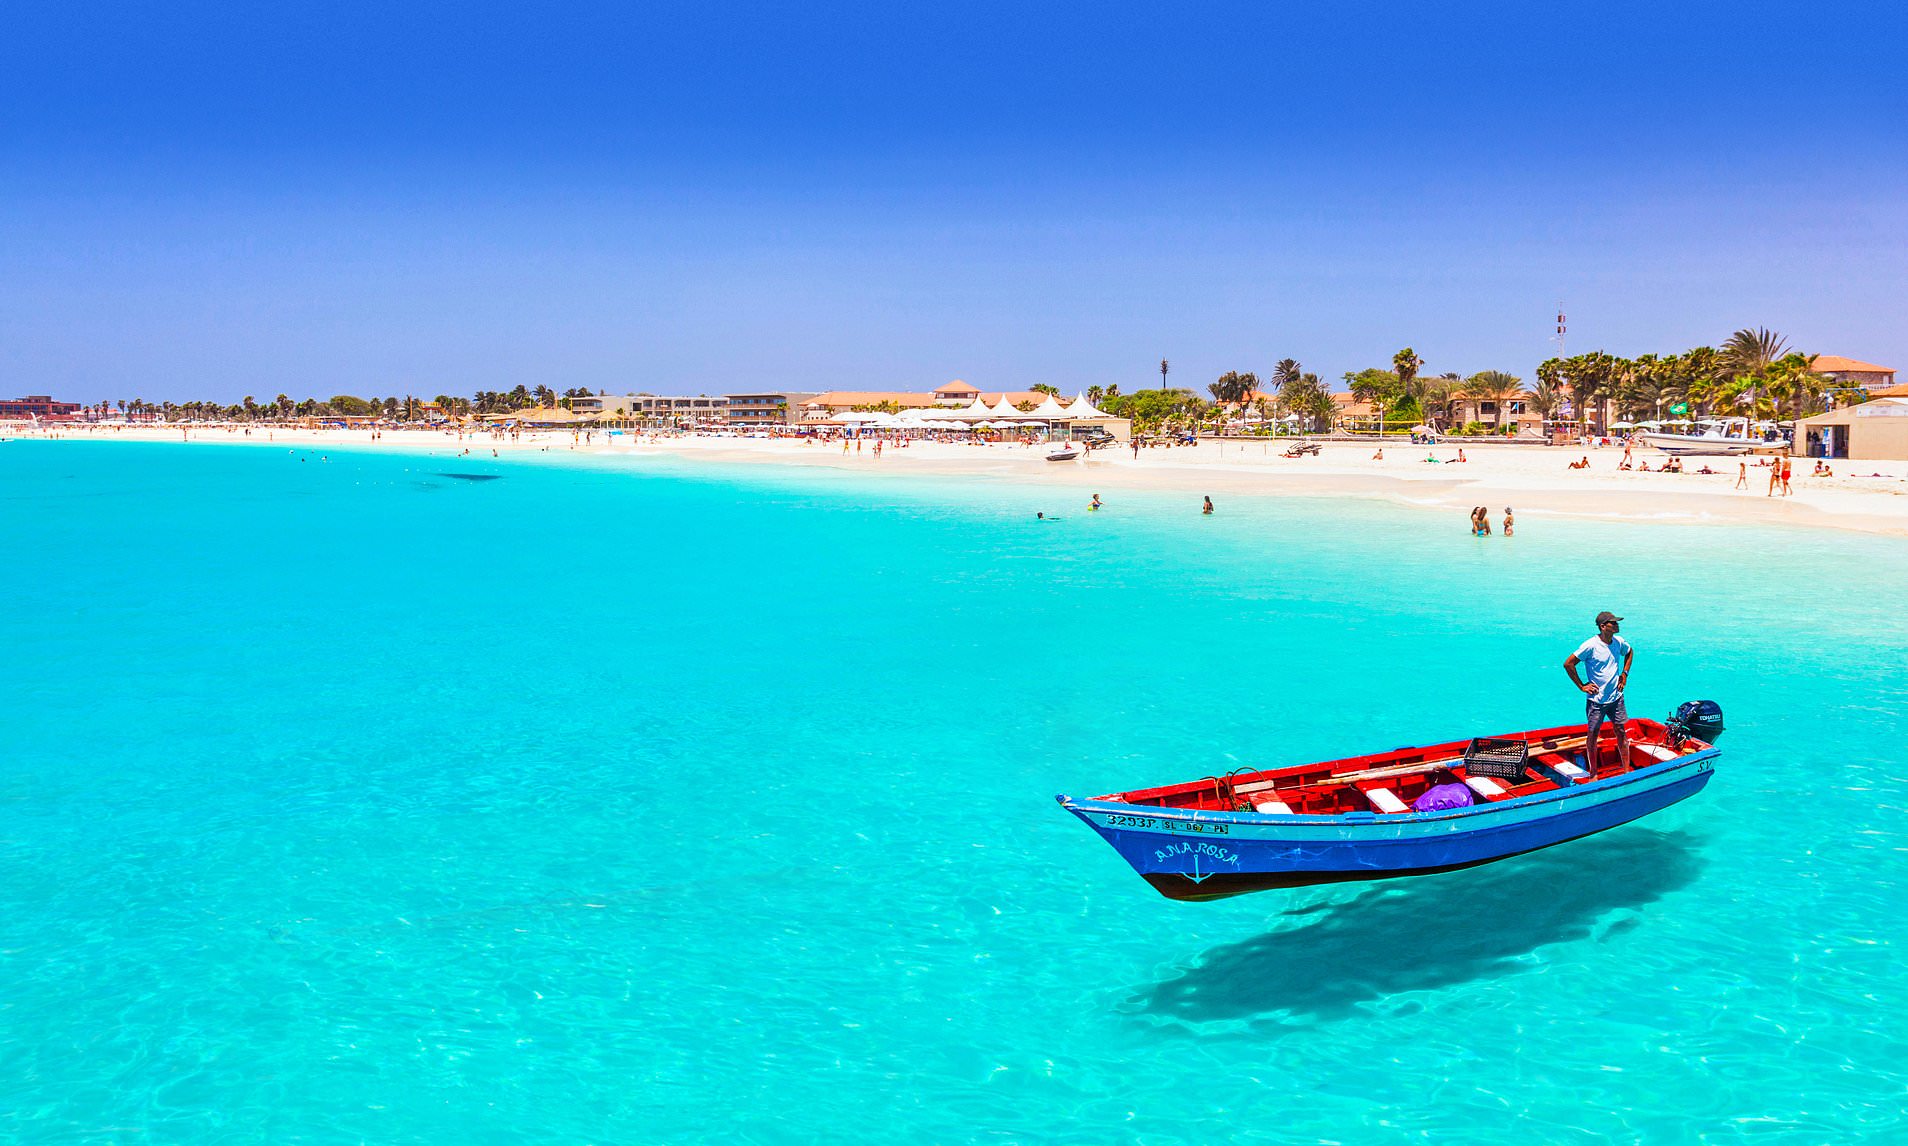 You are currently viewing All Inclusive holiday in Cape Verde (flights & 6-nights stay in 5* hotel), only £578 per person (dec 2020)